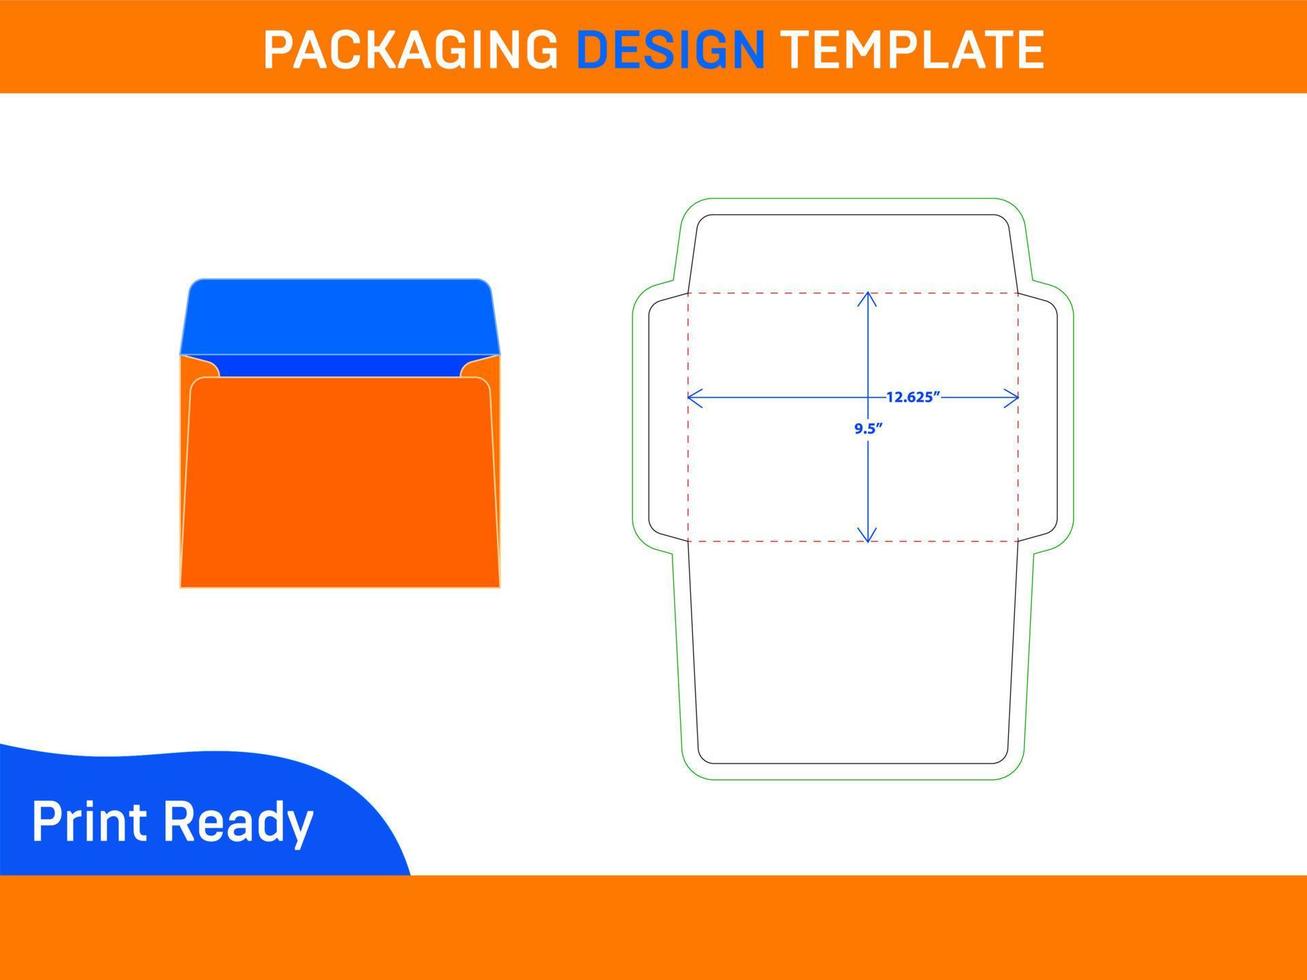 Resizable 9.5x12.625 inch Booklet envelope dieline template and 3D envelope vector